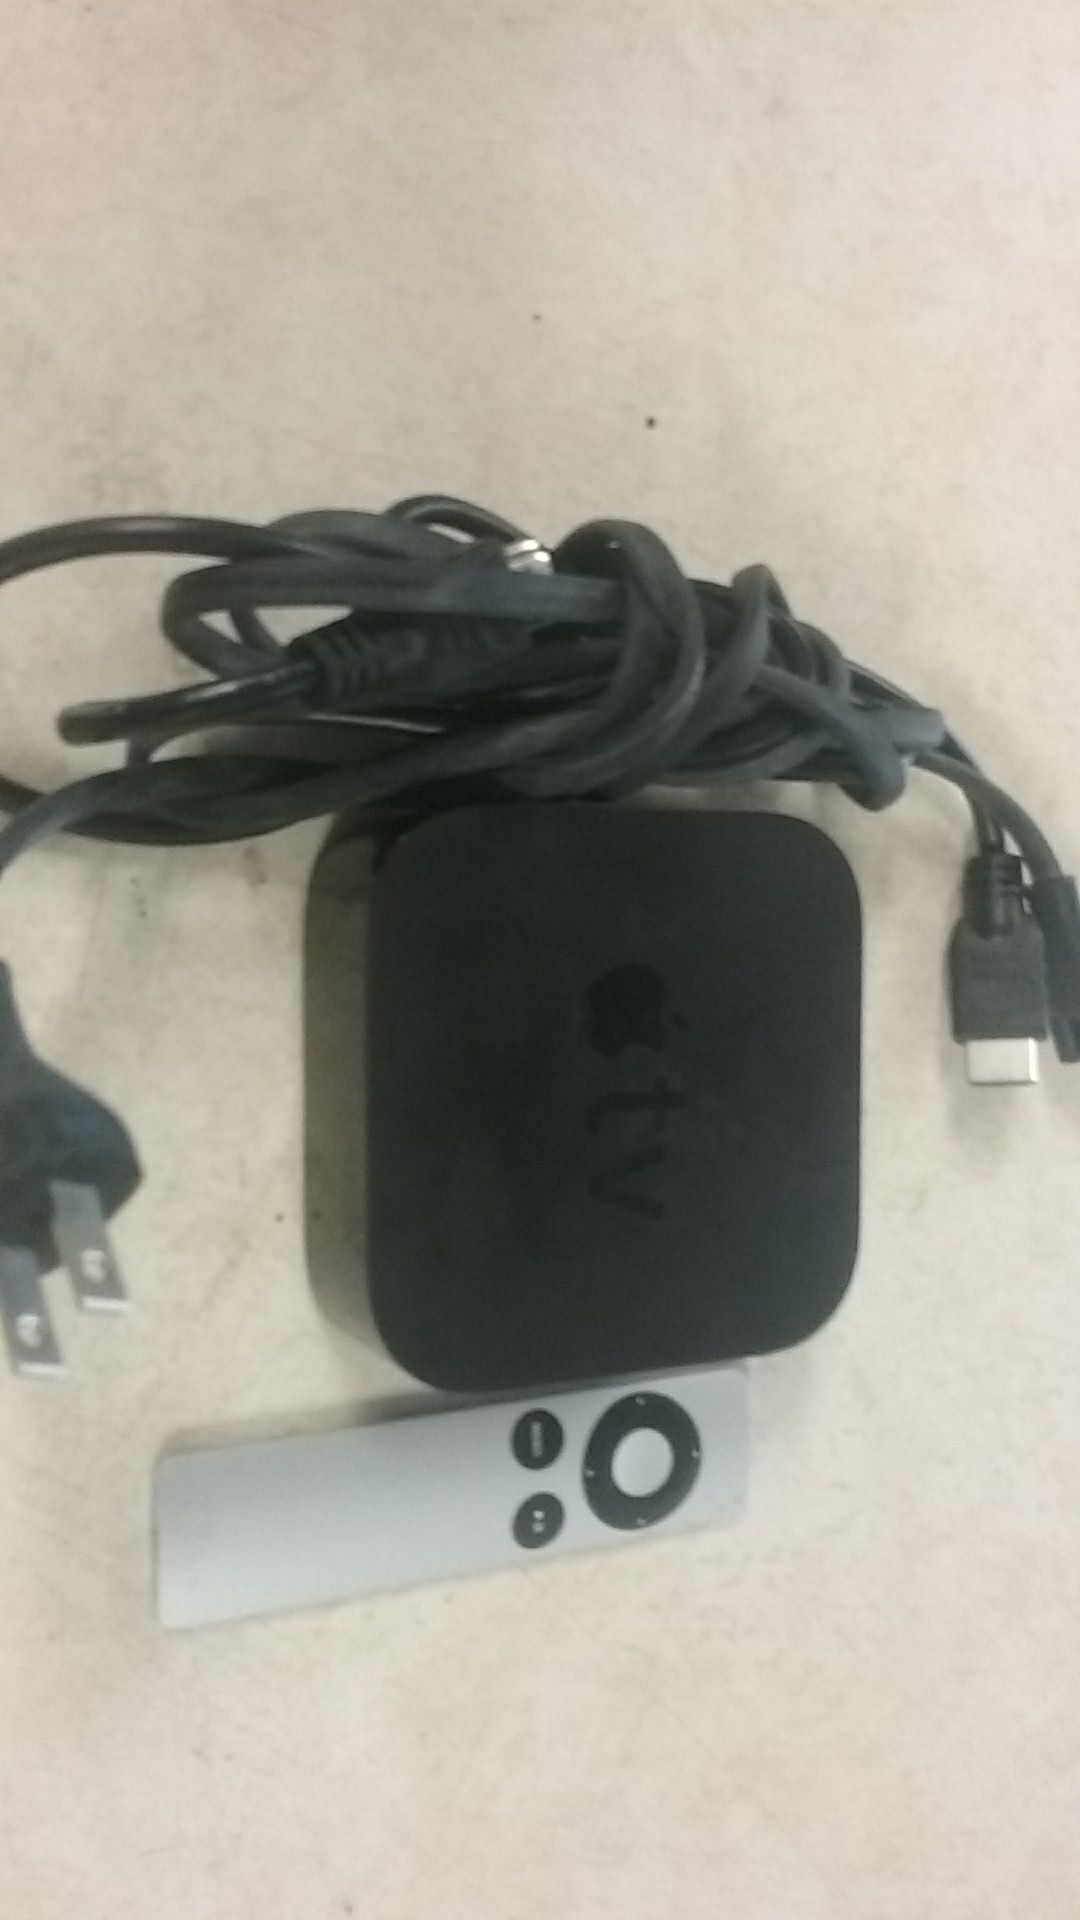 Apple tv with cords and remote